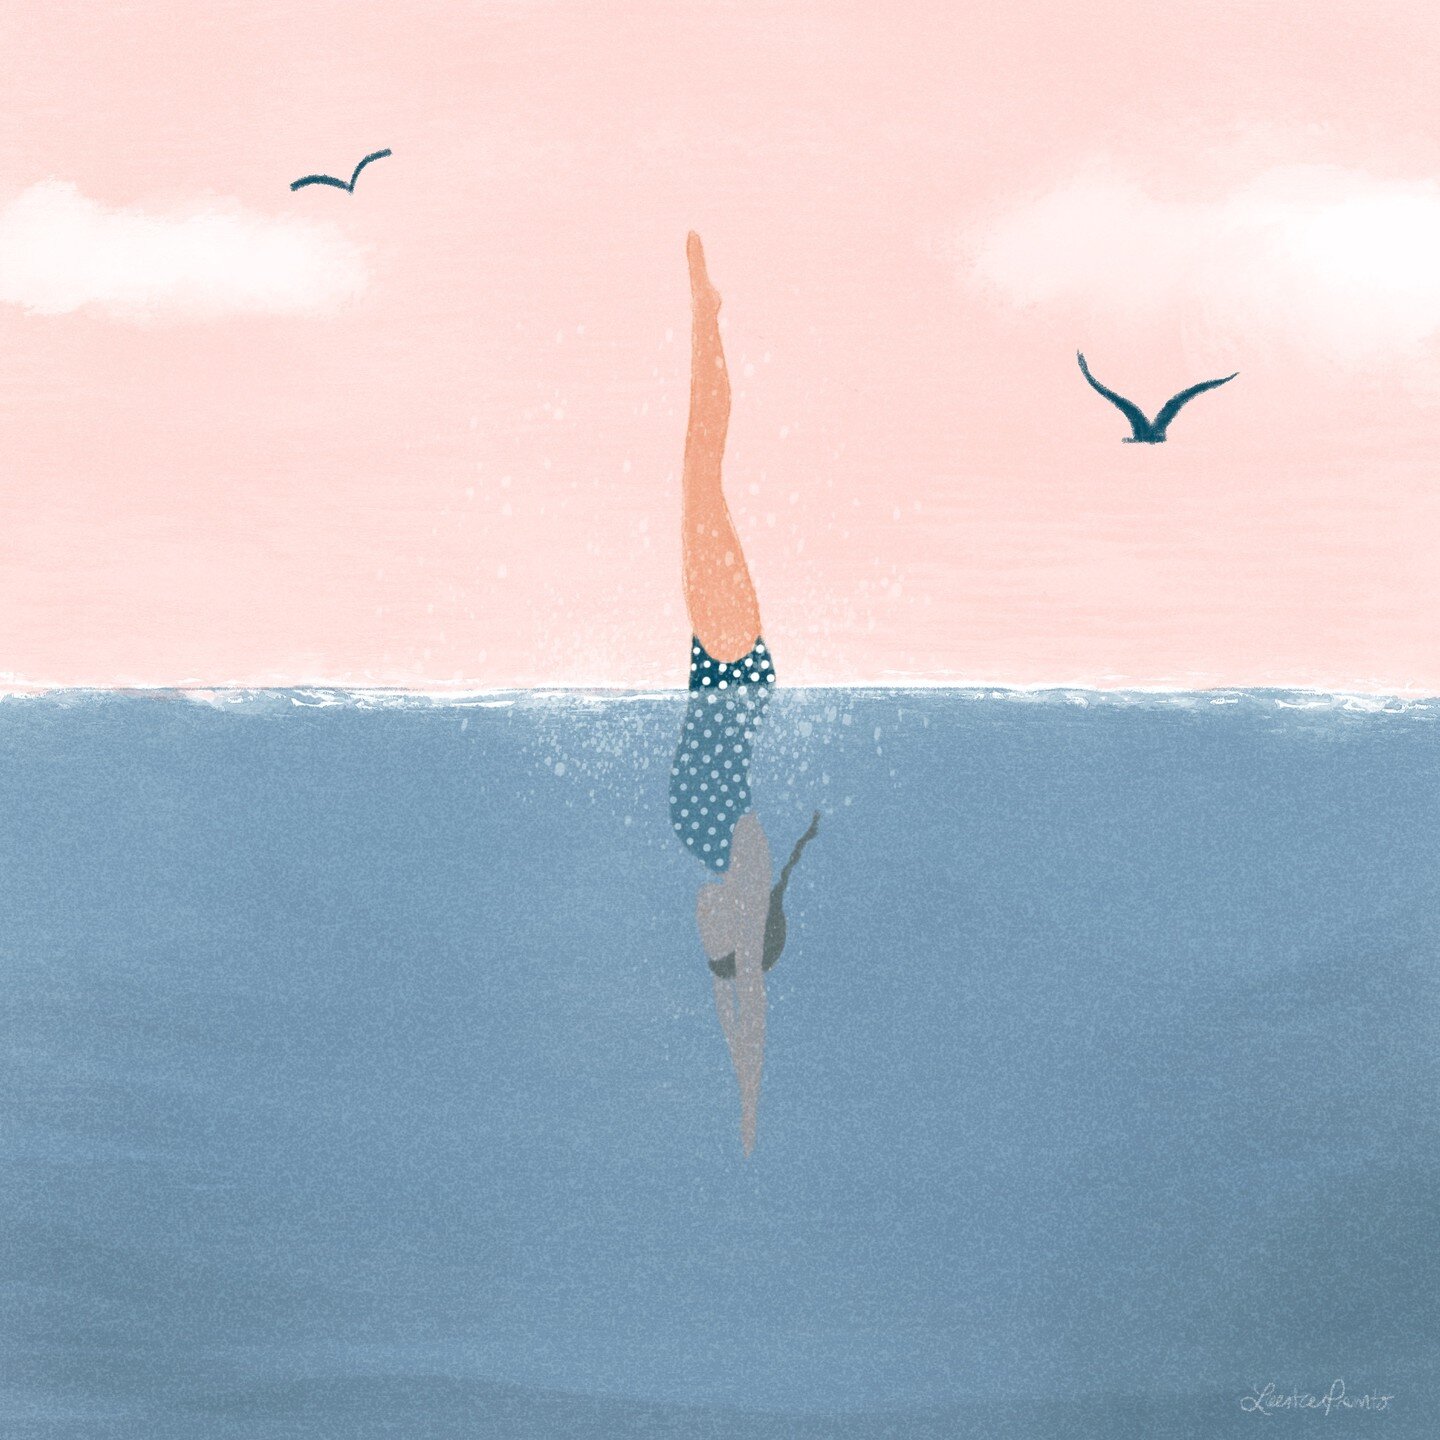 Diving Into Summer ~ I often think about a lot of things. As you can imagine I spend a lot of time in my head going deeper and deeper. Sometimes that means exploring many things or questioning certain ideologies but to do this you have to go deep wit